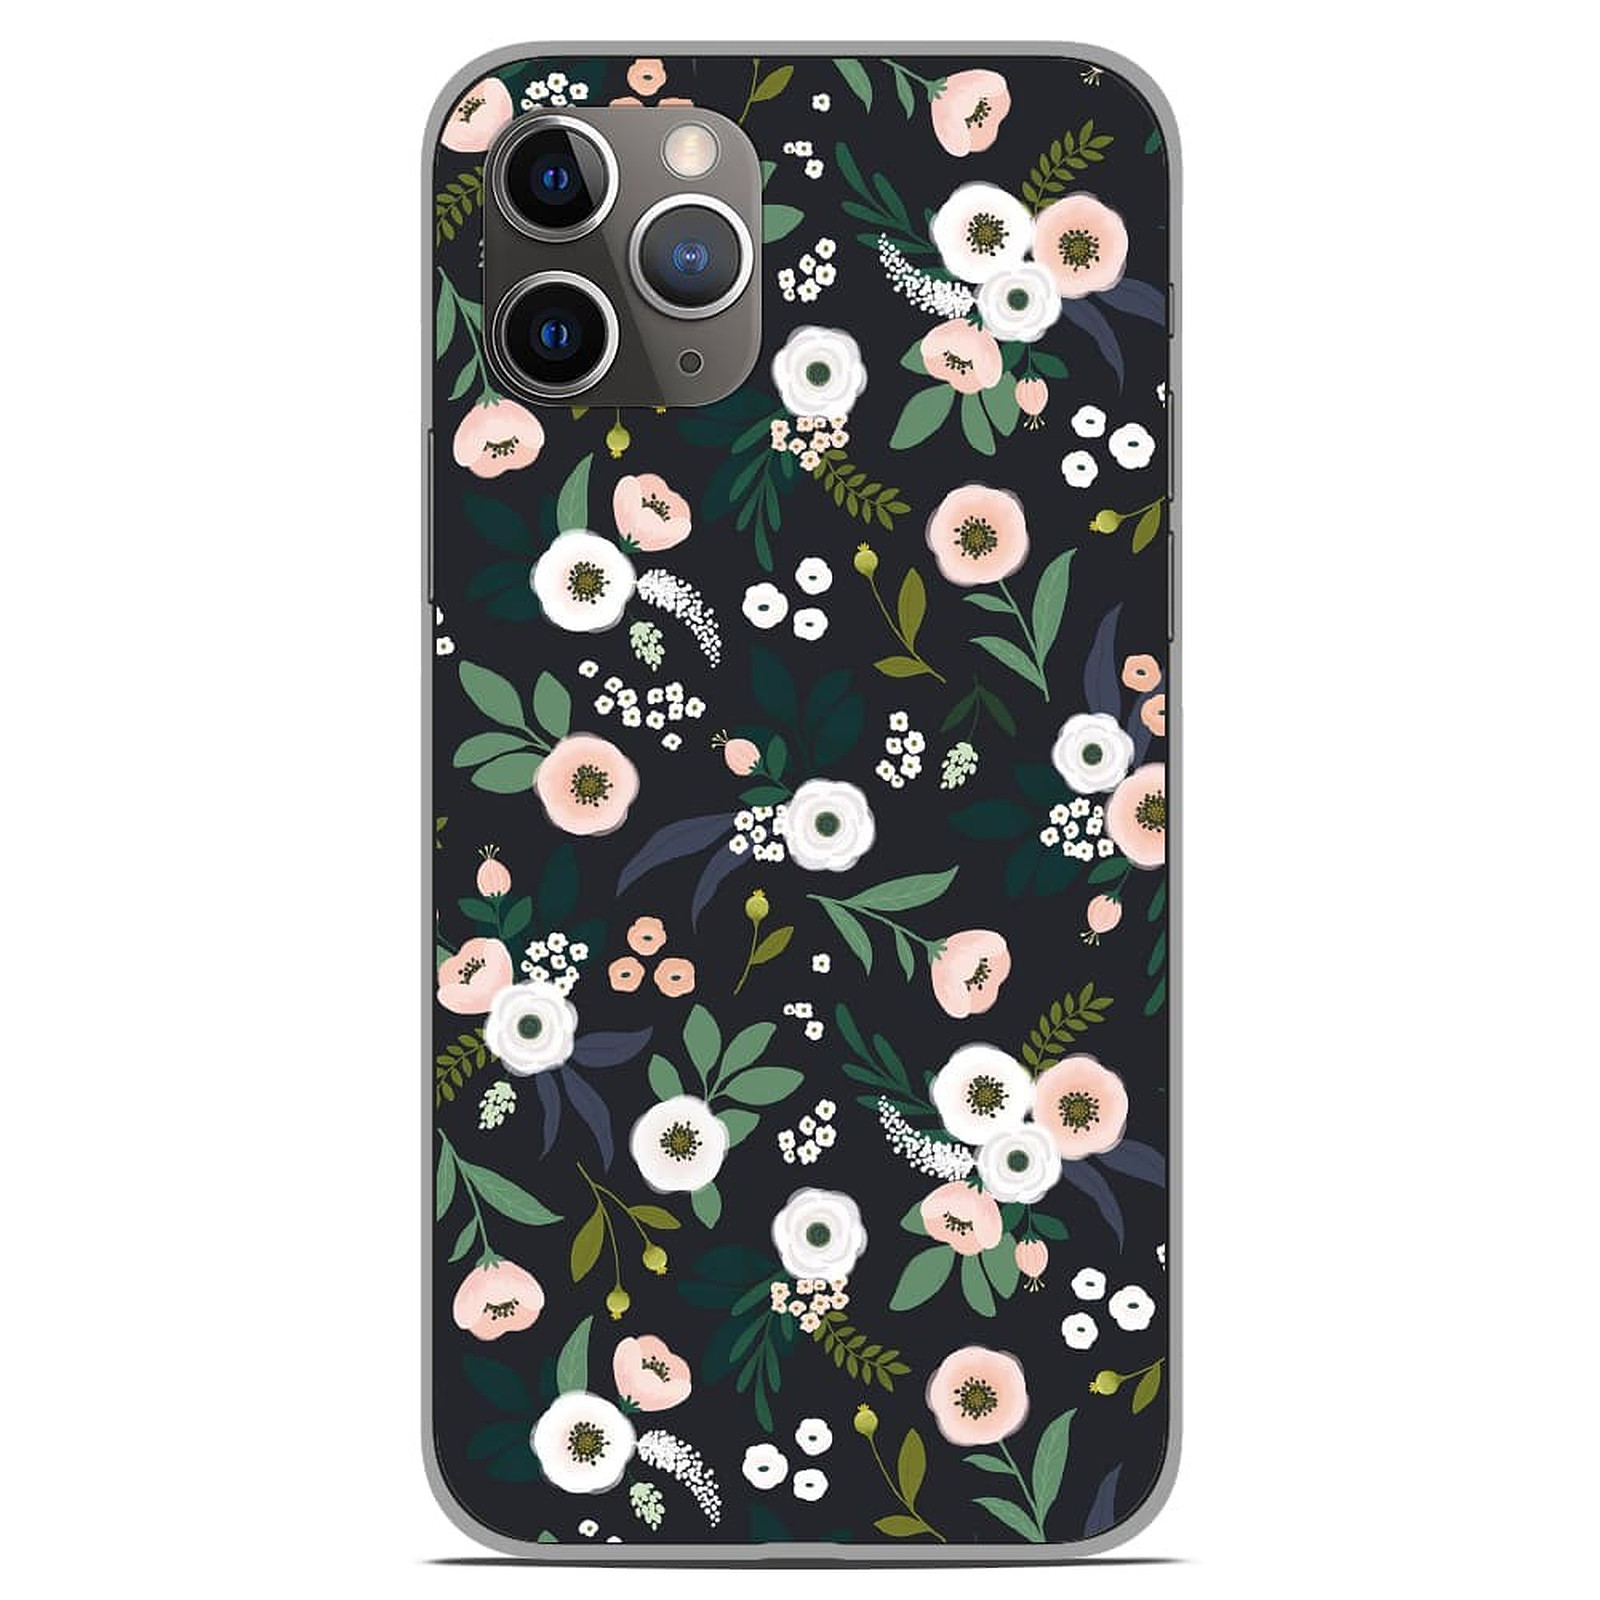 1001 Coques Coque silicone gel Apple iPhone 11 Pro motif Flowers Noir - Coque telephone 1001Coques